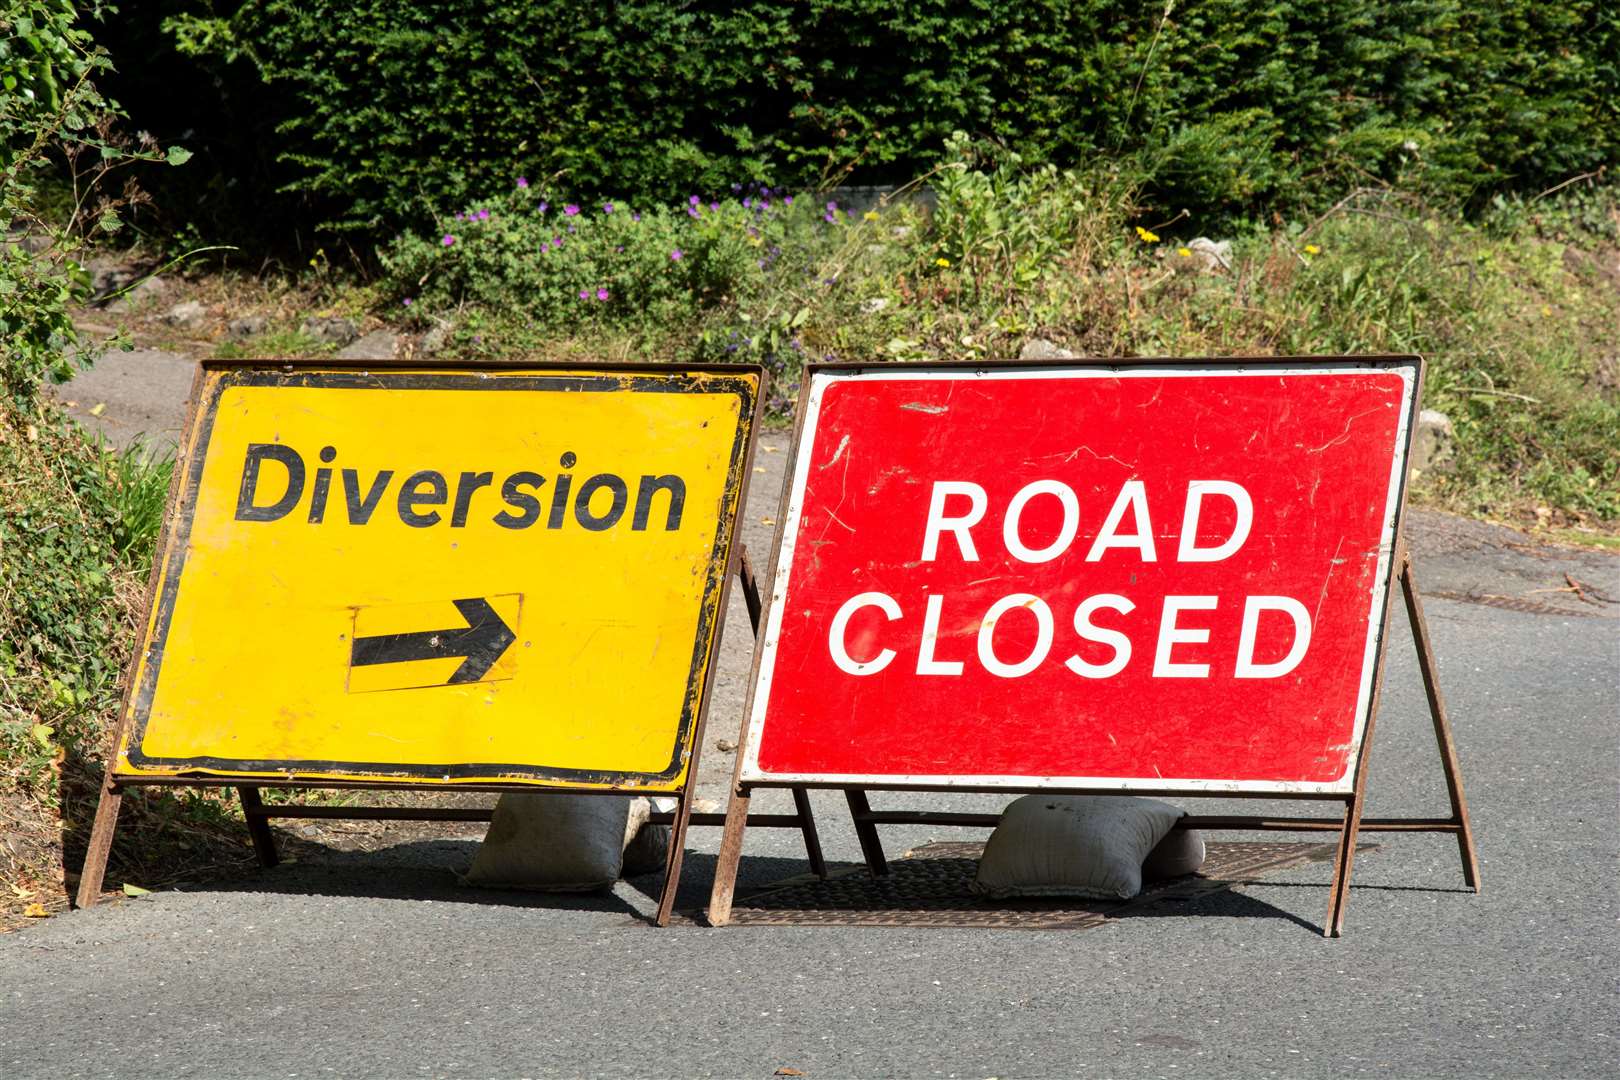 Road closed and diversion sign